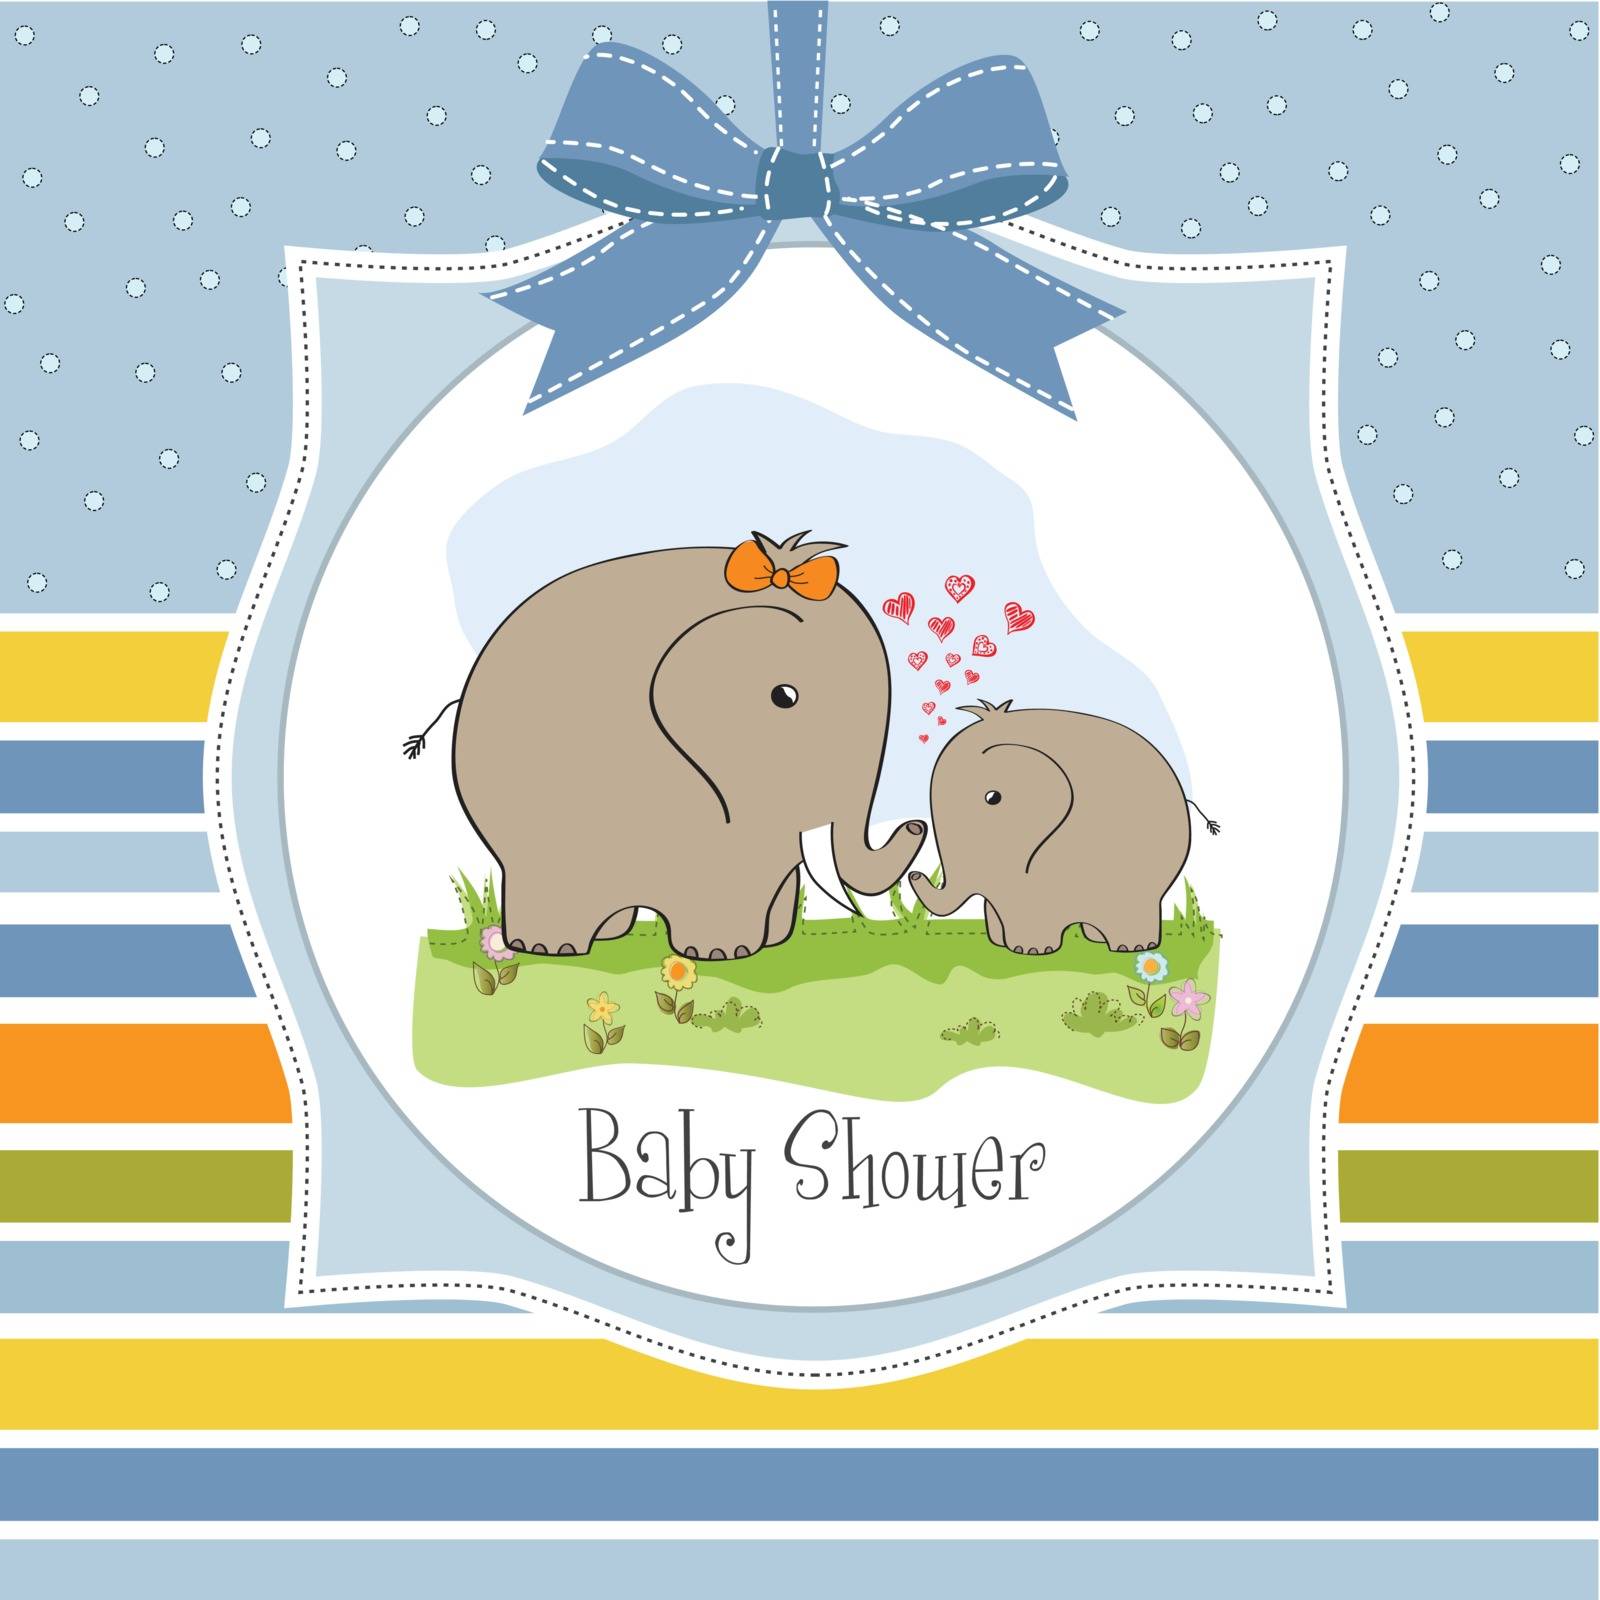 baby shower card with baby elephant and his mother by balasoiu